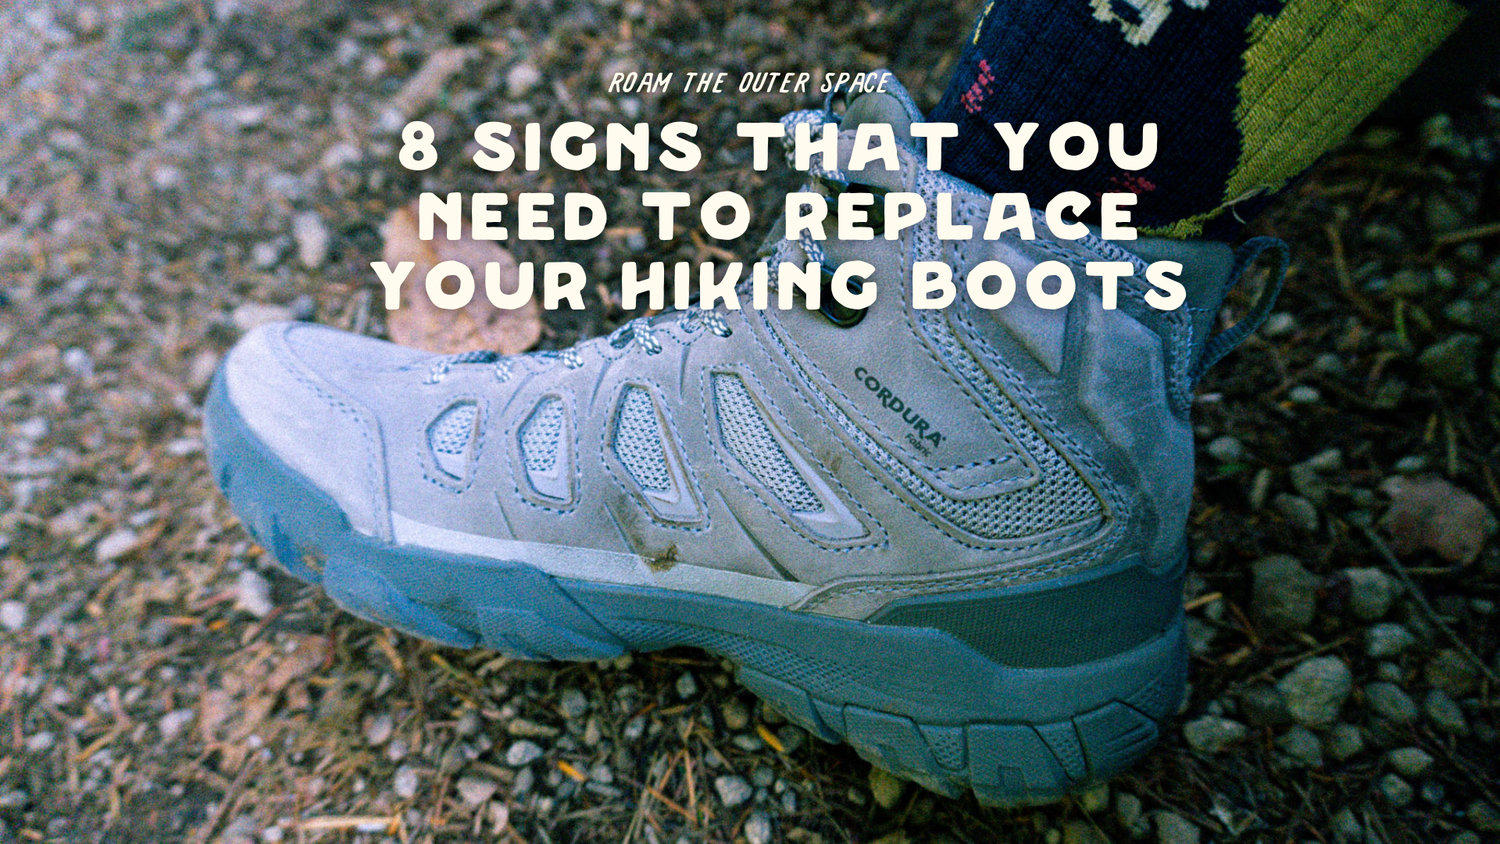 8 Signs That You Need to Replace Your Hiking Boots | Roam the Outer Space